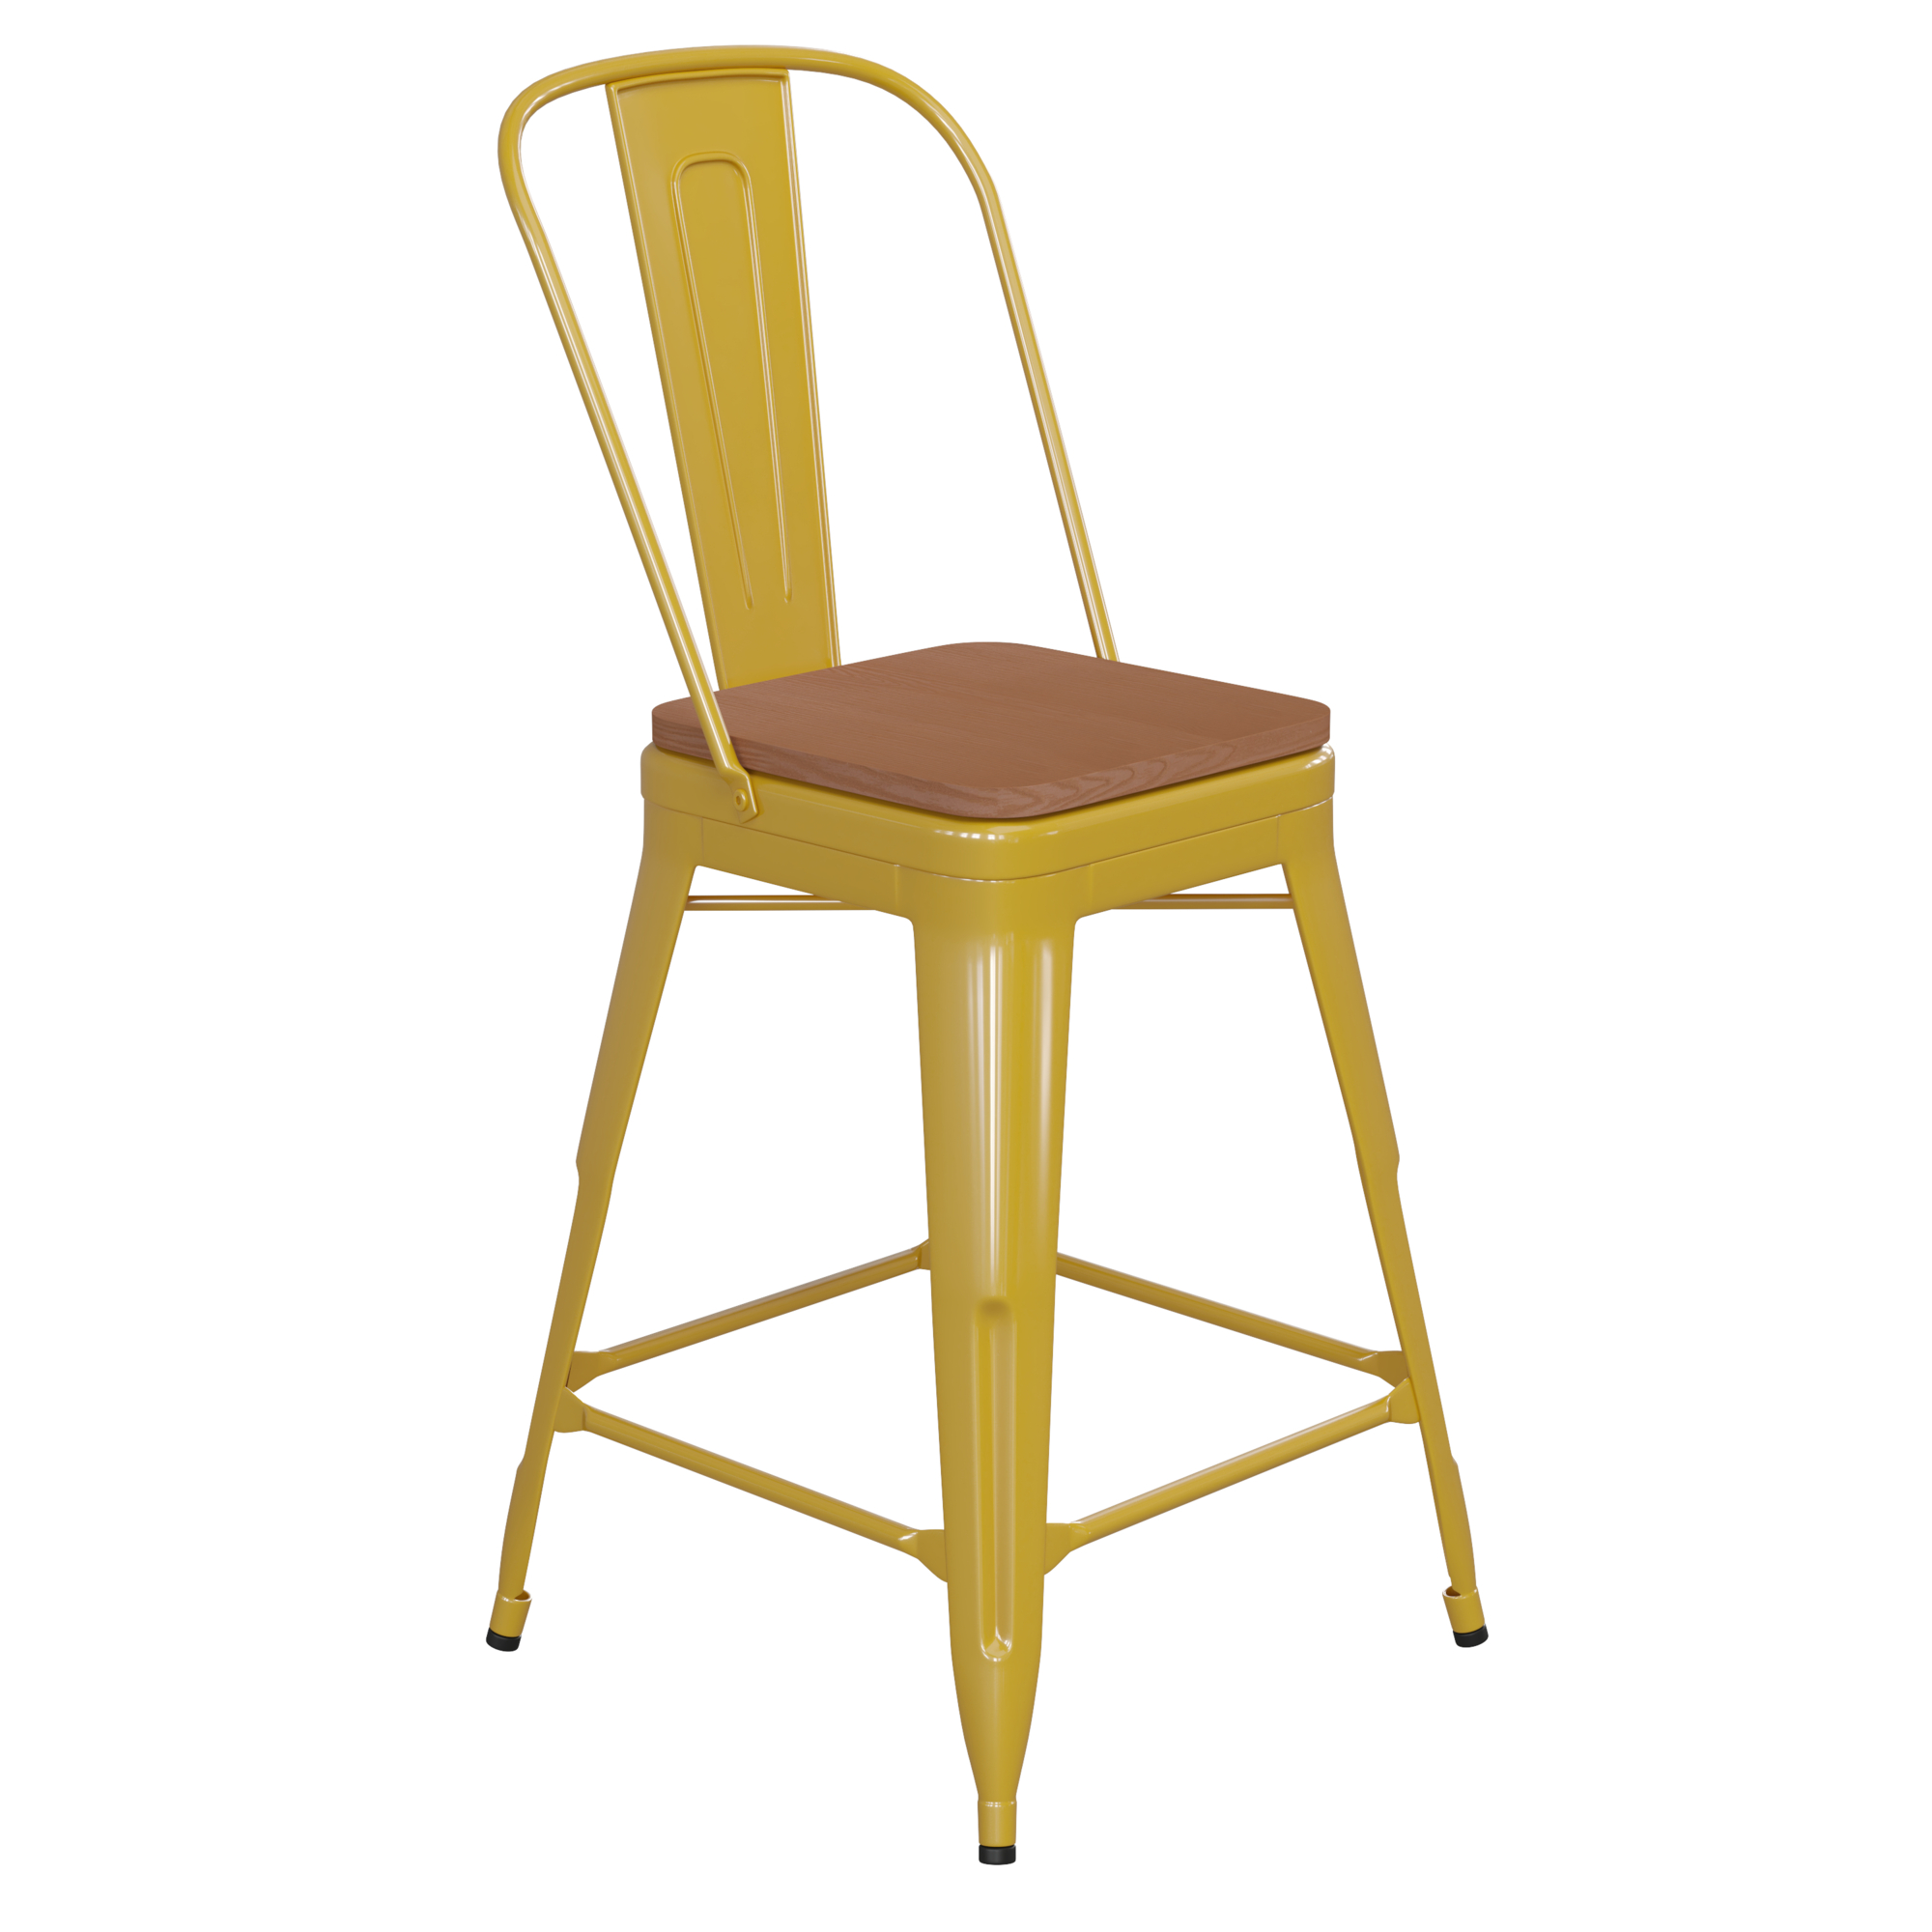 Flash Furniture, 24Inch Yellow Metal Counter Stool-Teak Poly Seat, Primary Color Yellow, Included (qty.) 1, Model CH3132024GYLP2T